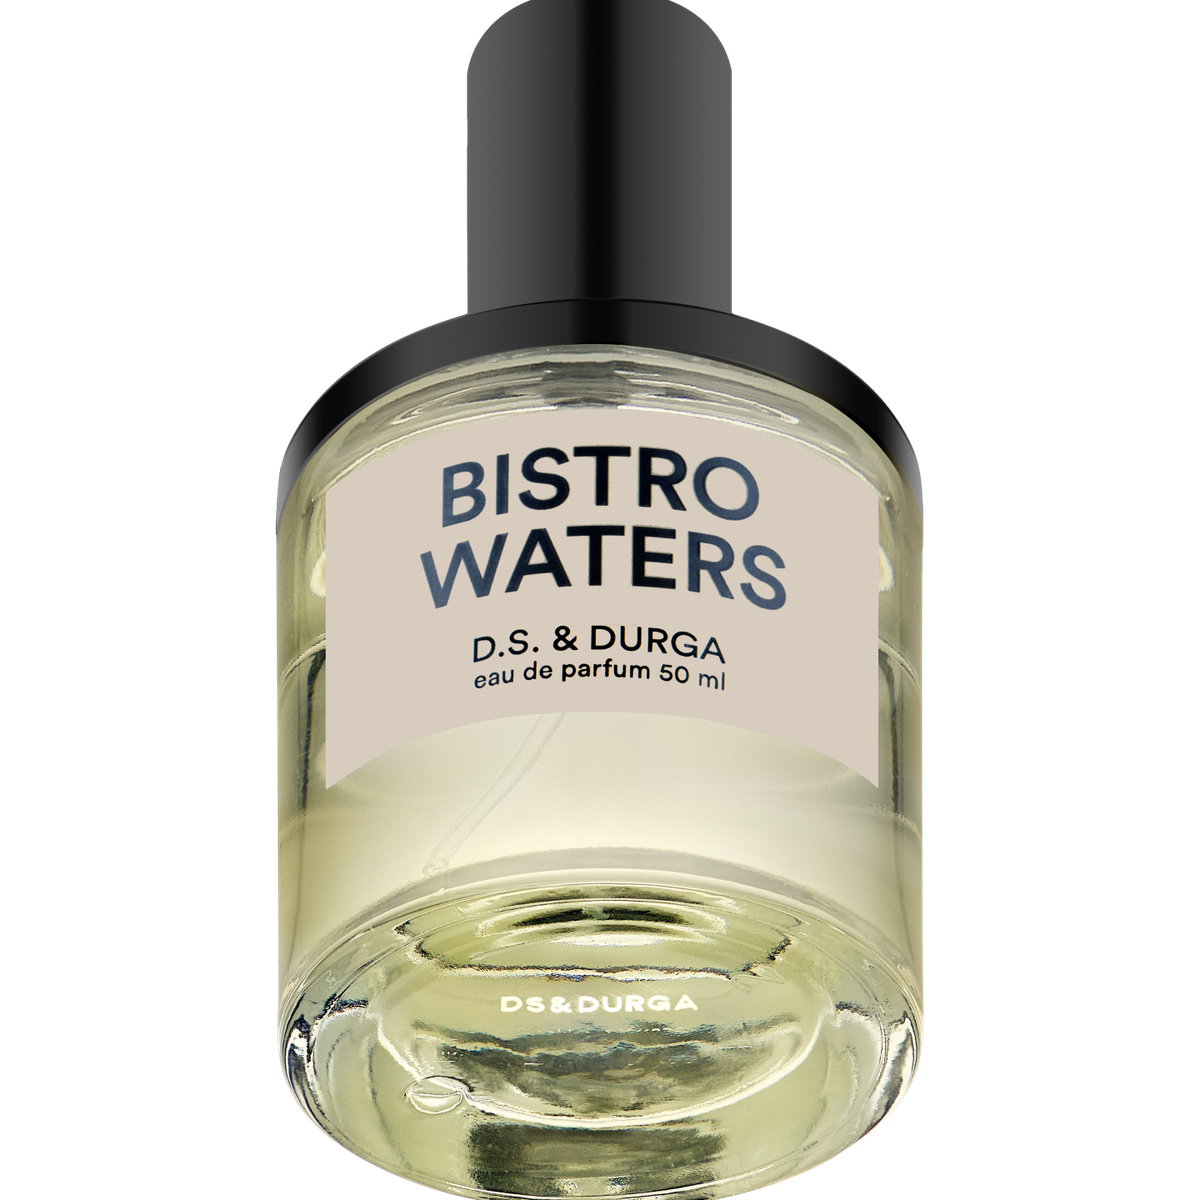 A bottle of bistro waters perfume